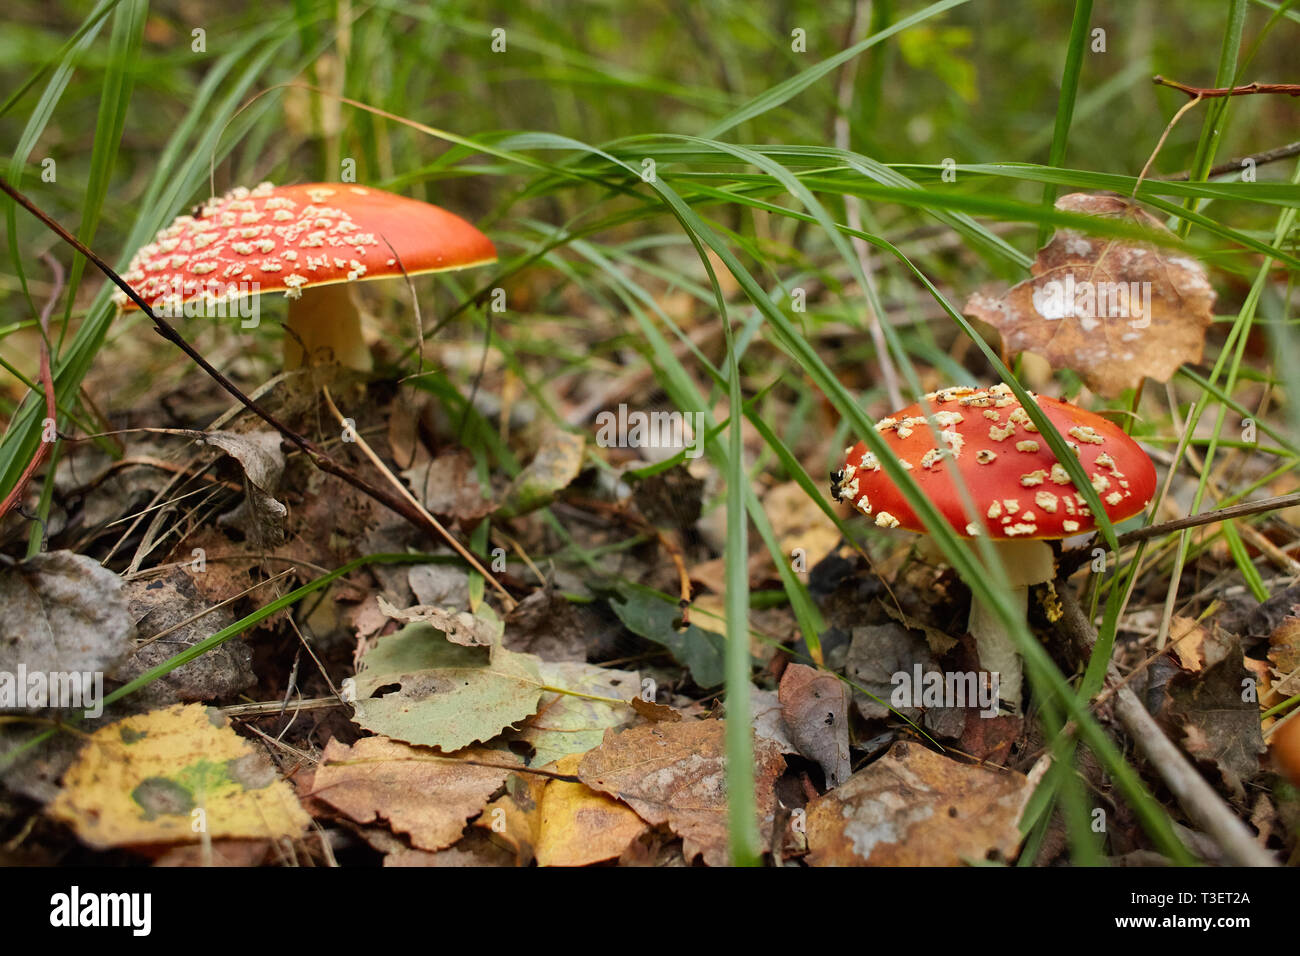 Amanita muscaria, commonly known as the fly agaric or fly amanita, is a mushroom and psychoactive basidiomycete fungus Stock Photo